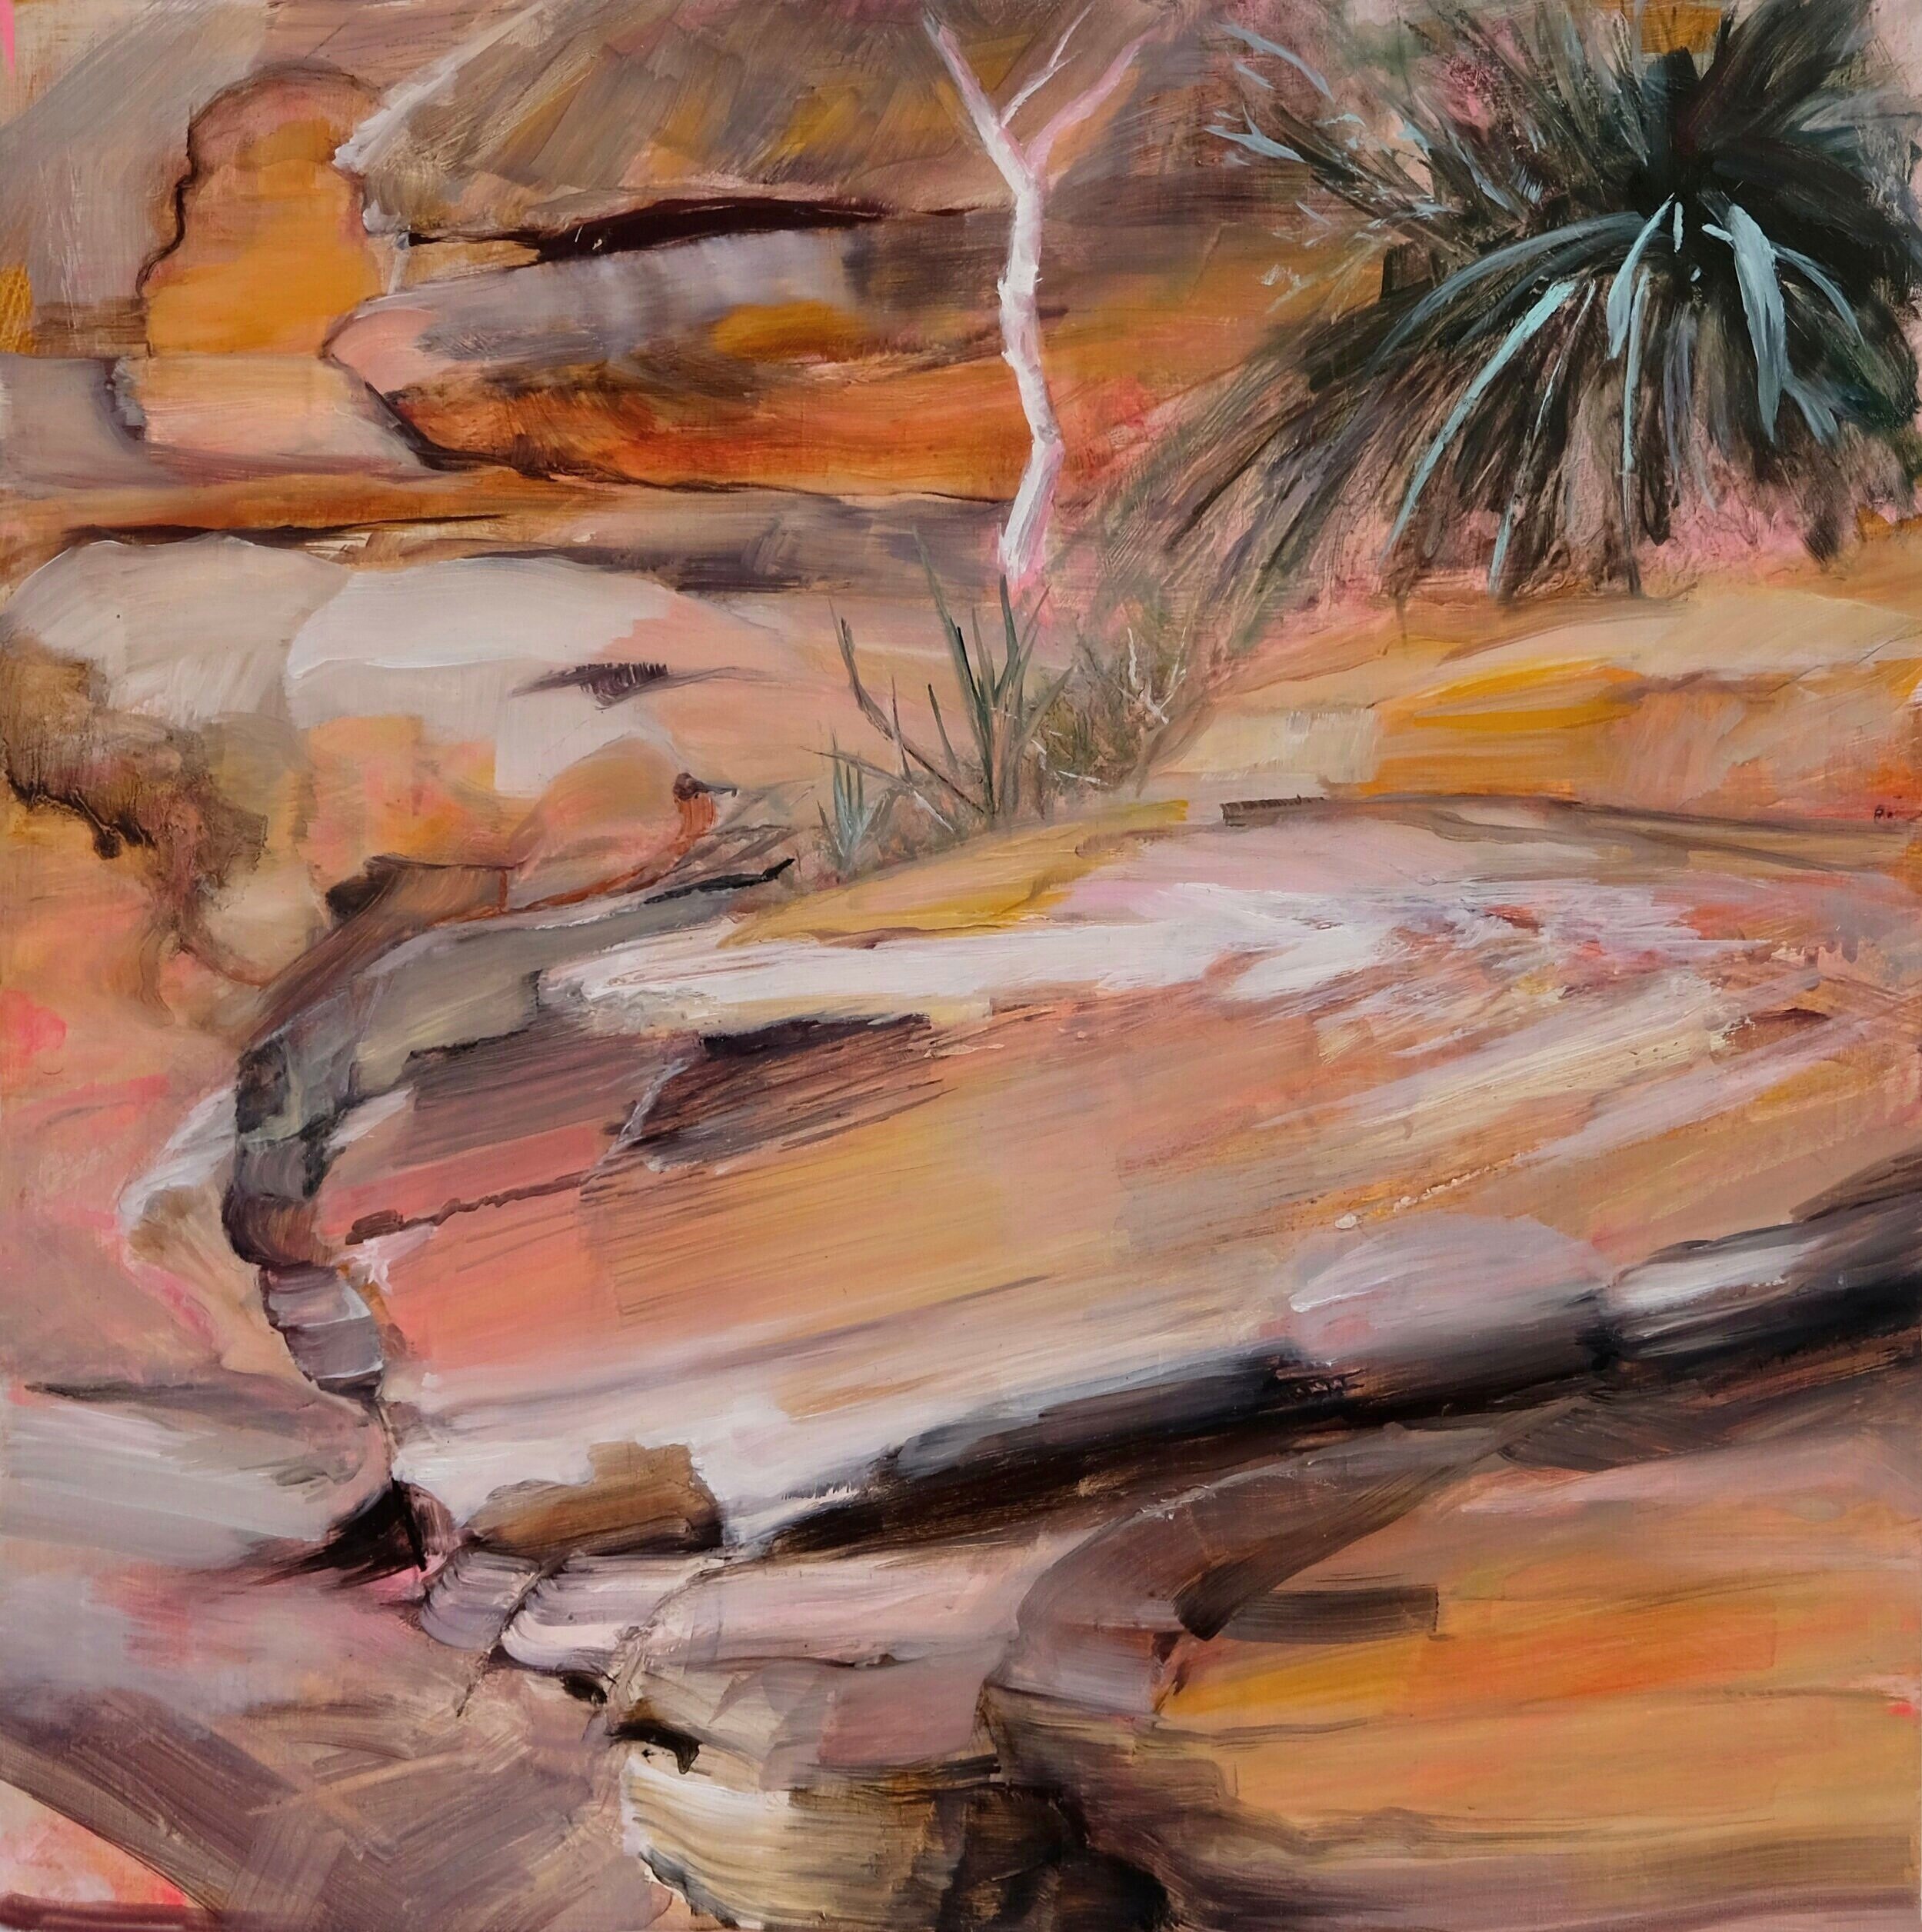 Seam (Royal National Park series) 2021 acrylic and oil on board 30 x 30cm